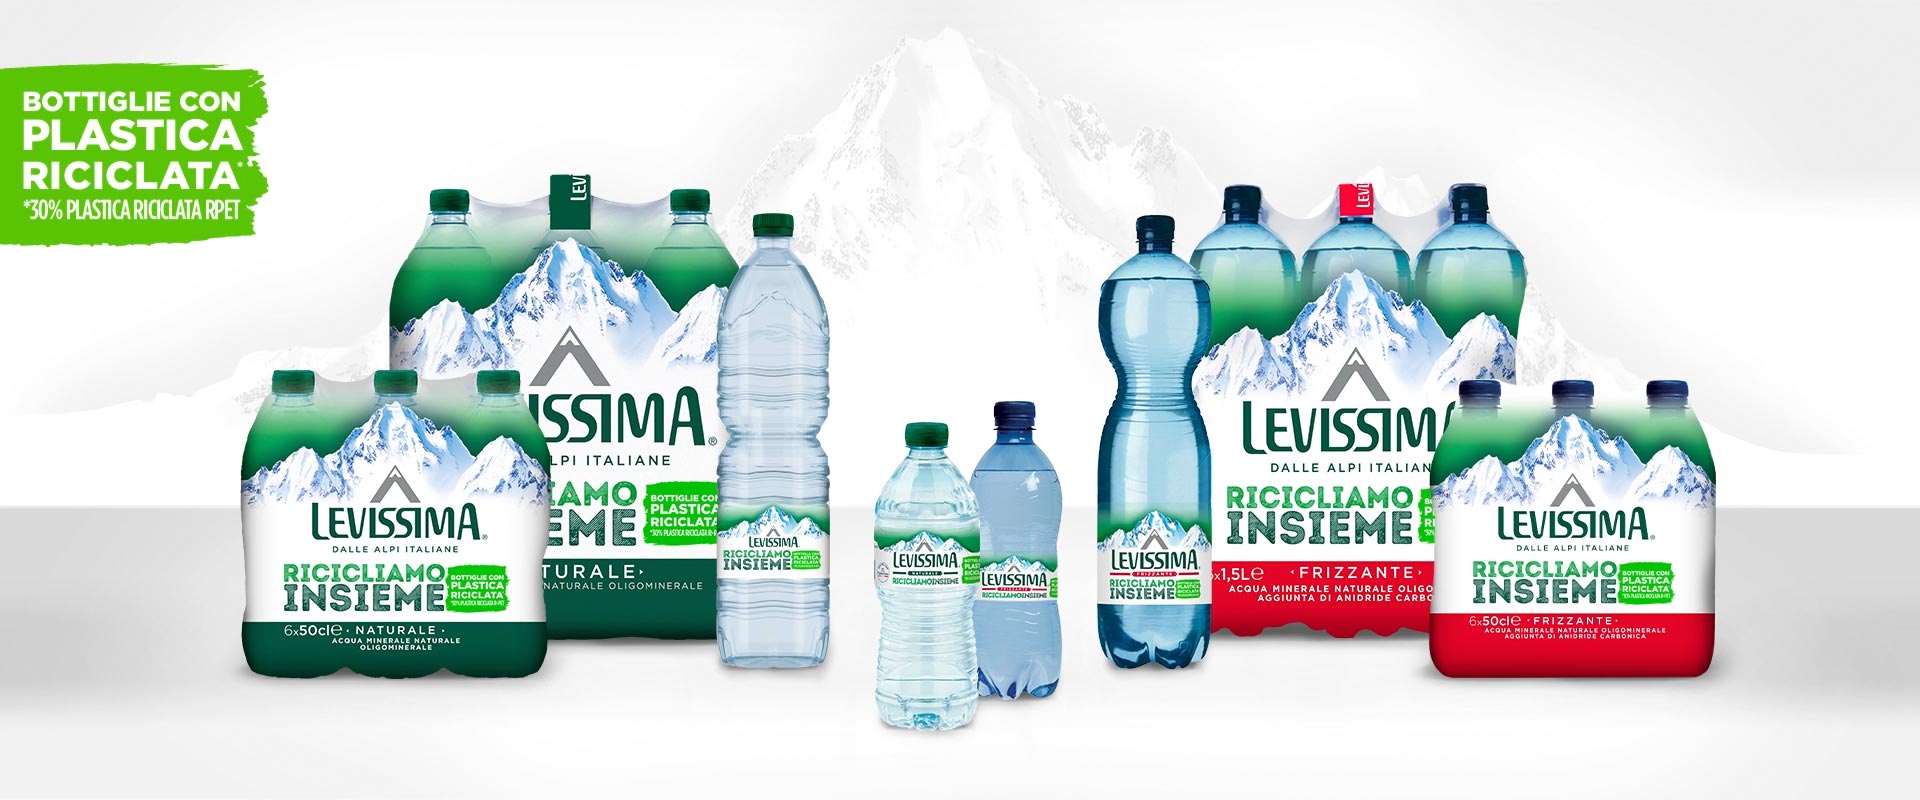 Levissima’s call to action “Let’s recycle together”